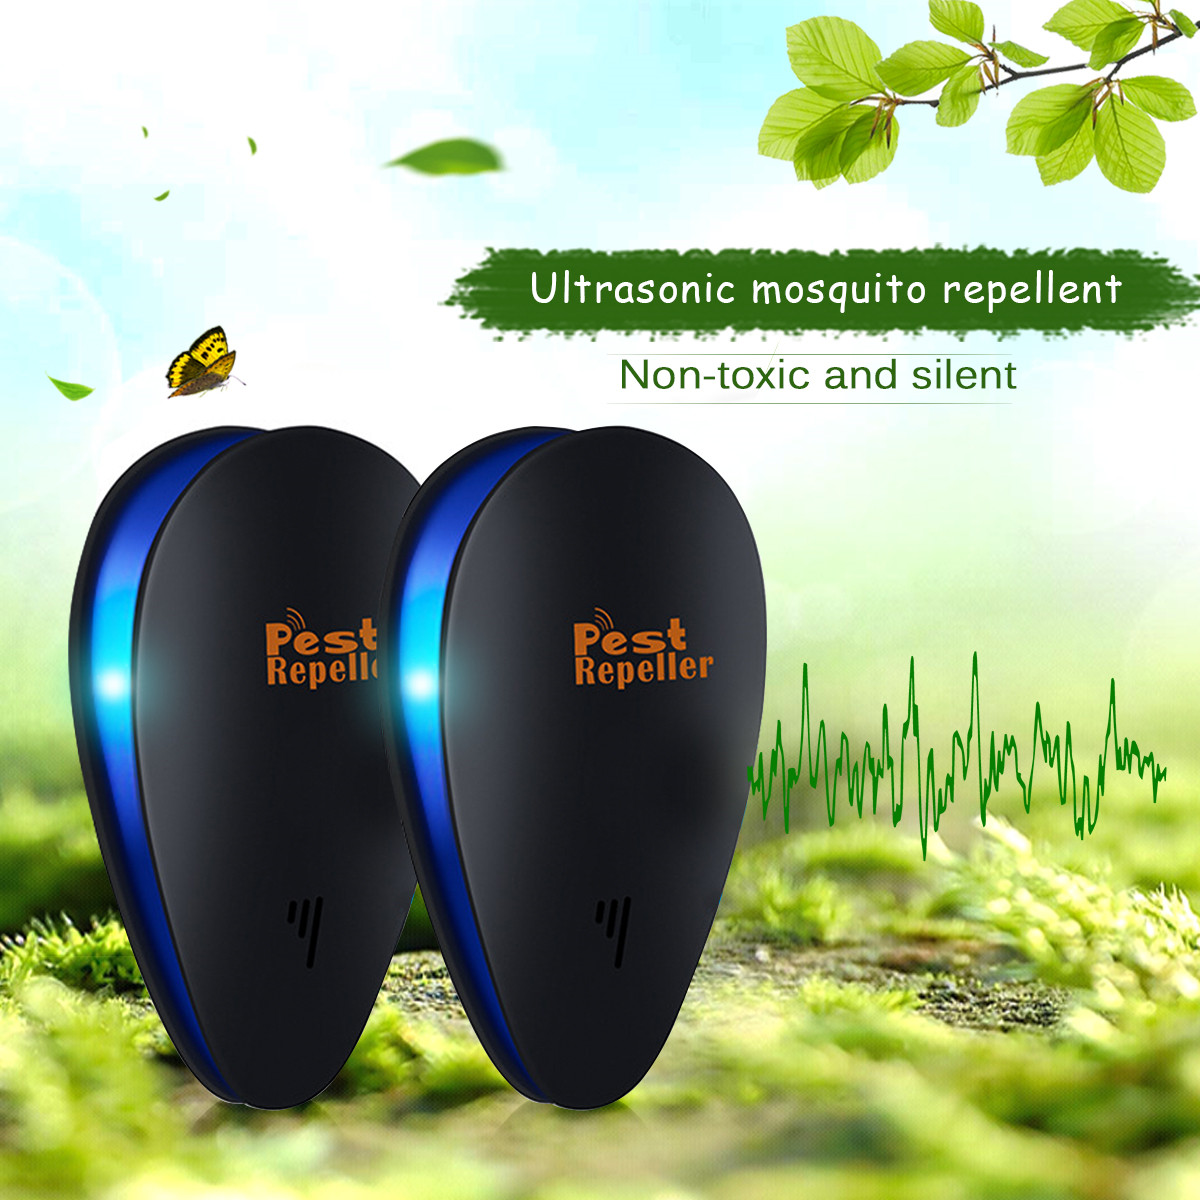 GARPROVM 4Pcs Ultrasonic Insect Repellent Electronic Mosquito Mice Fly Contro Outdoor Camping Garden